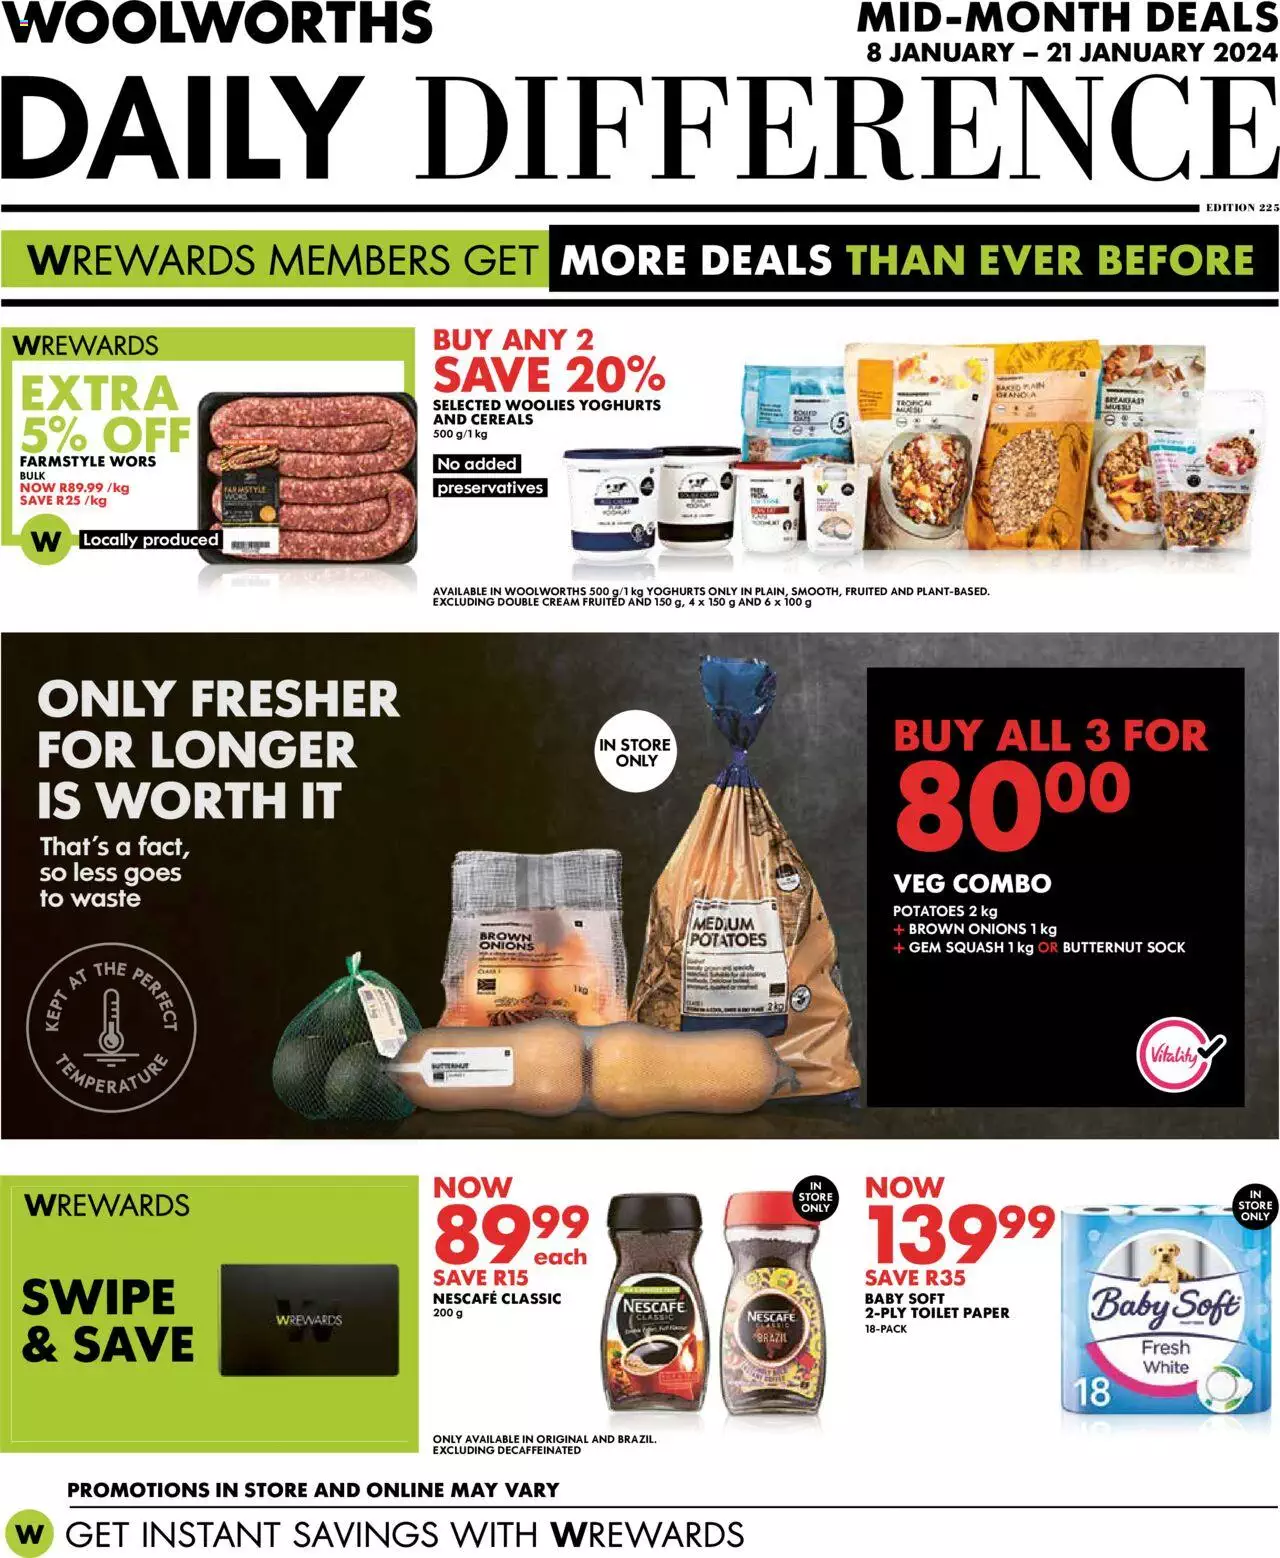 Woolworths Specials 8 – 21 January 2024